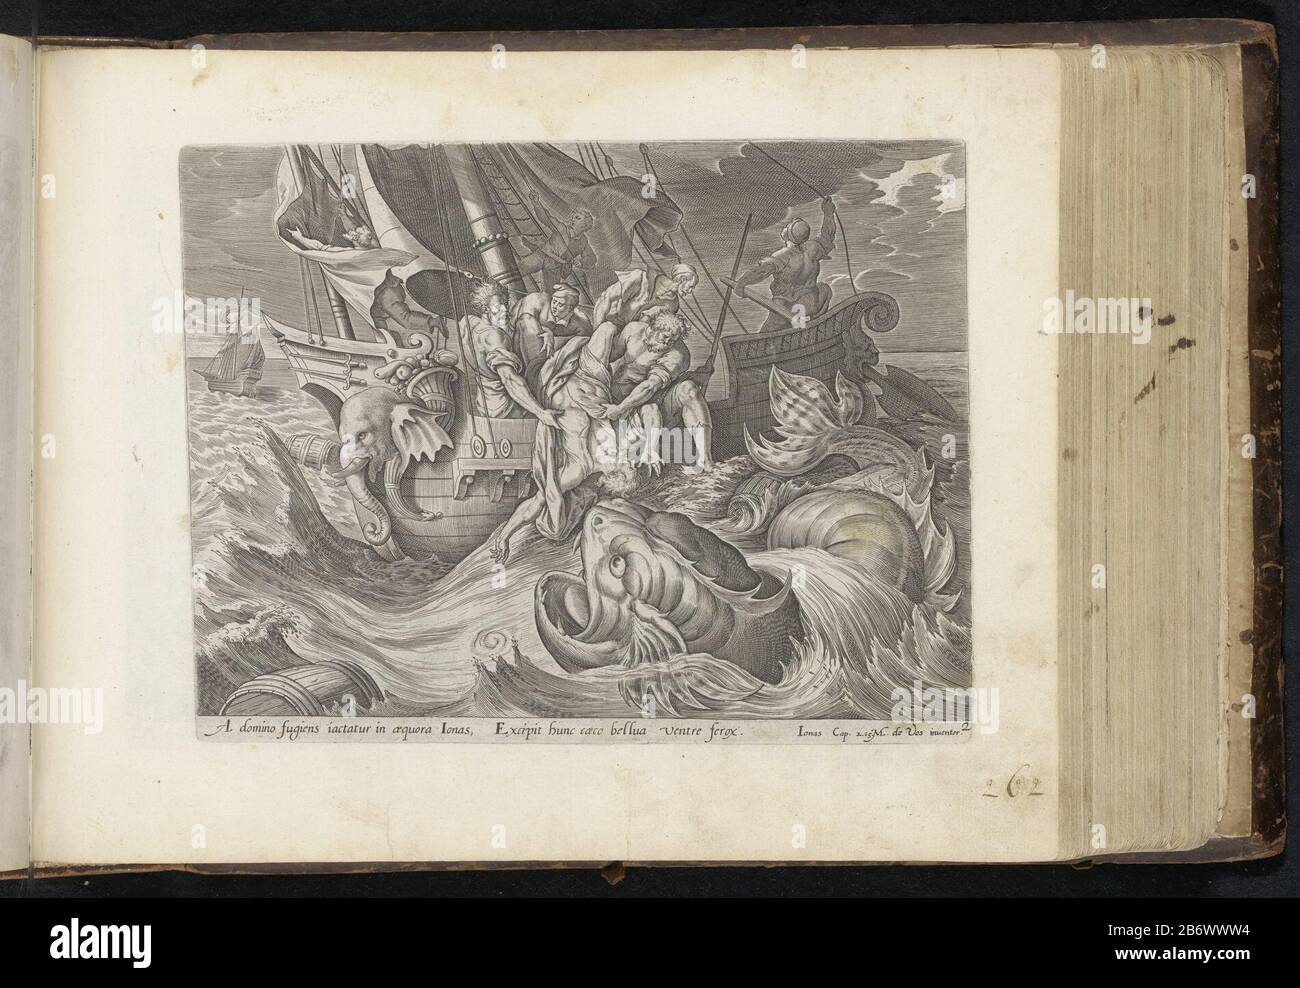 Jona overboord gezet Van den Propheet Ionas (serietitel) Geschiedenis van Jona (serietitel) Den Grooten Figuer-Bibel (serietitel) If the ship Where: Jonah fled threatens to perish in a storm, Jonah is drawn by lot as the culprit. He was thrown overboard by the crew. In the foreground swim the fish, which will swallow Jonah. Among the performance, a reference in Latin to the Bible in Jona 2:15. This print is part of a album. Manufacturer : printmaker Antonie Wierix (III) to design: Marten de Vos (listed building) publisher Claes Jansz. Visscher (II) Editor: Jan Philipsz SchabaeljePlaats manufac Stock Photo